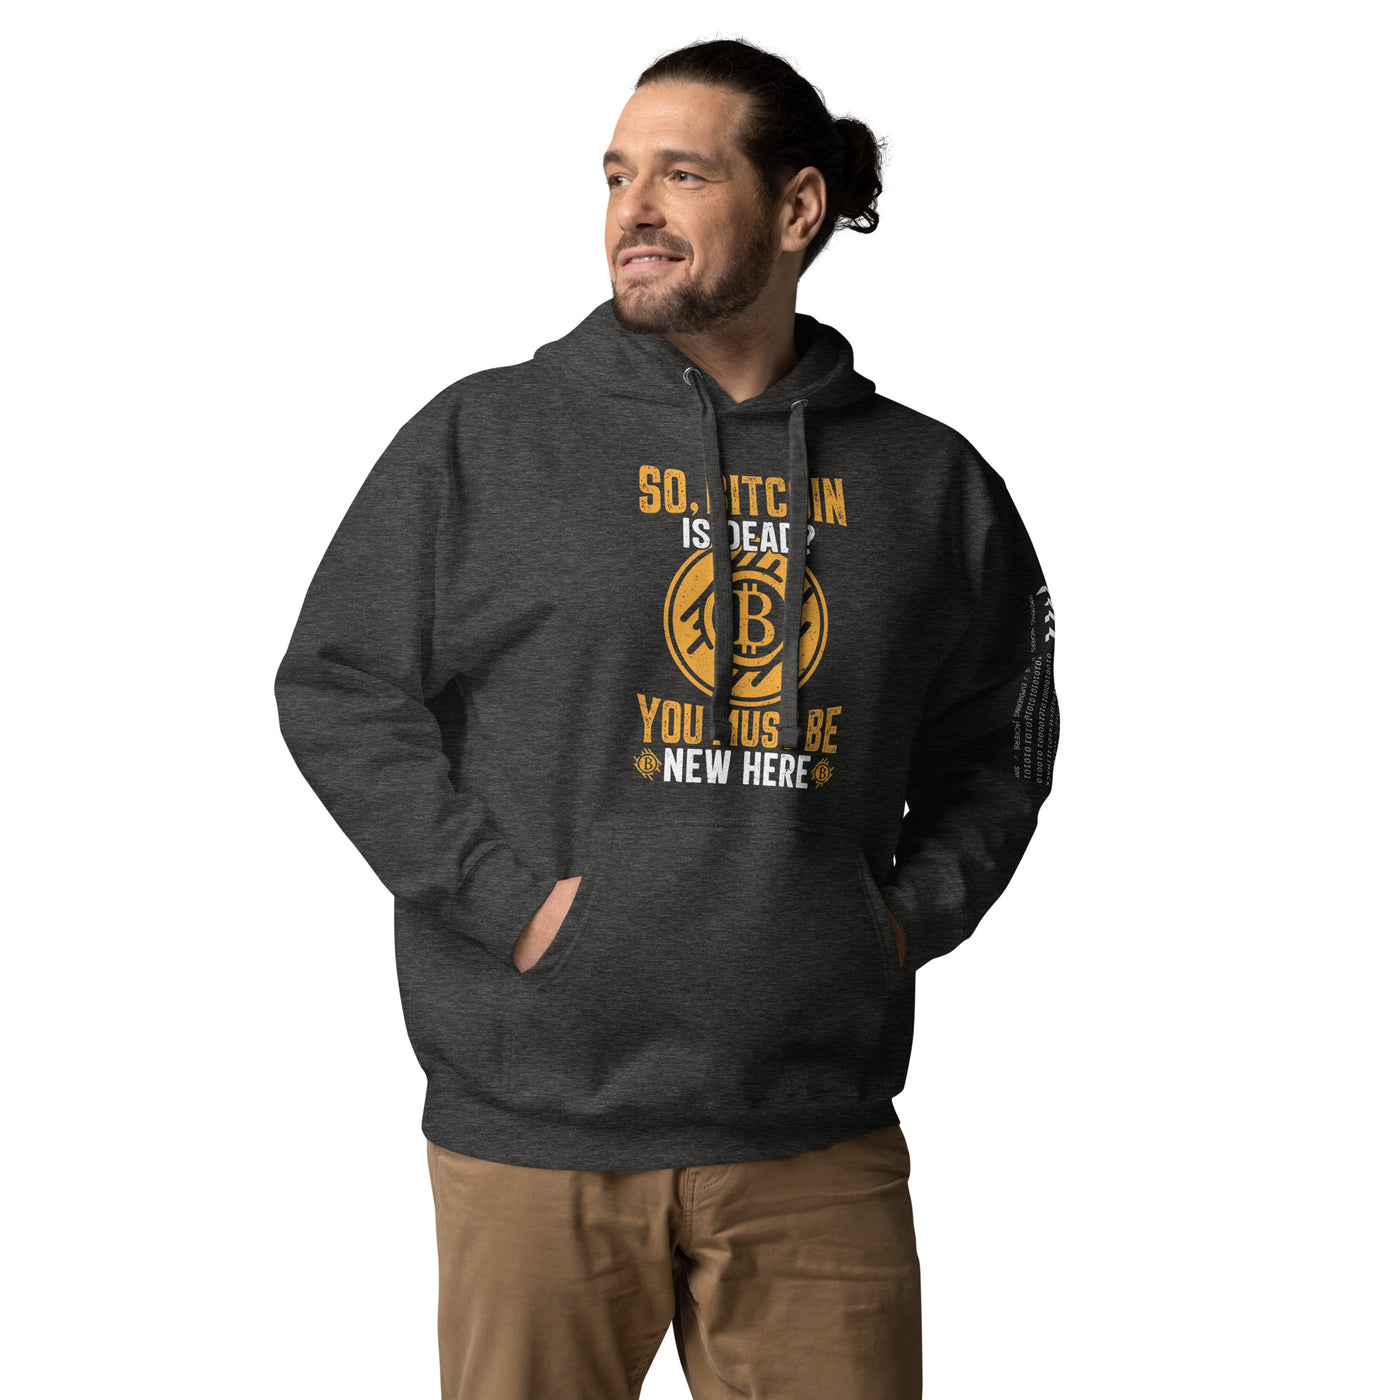 So, Bitcoin is Dead? You must be new here - Unisex Hoodie